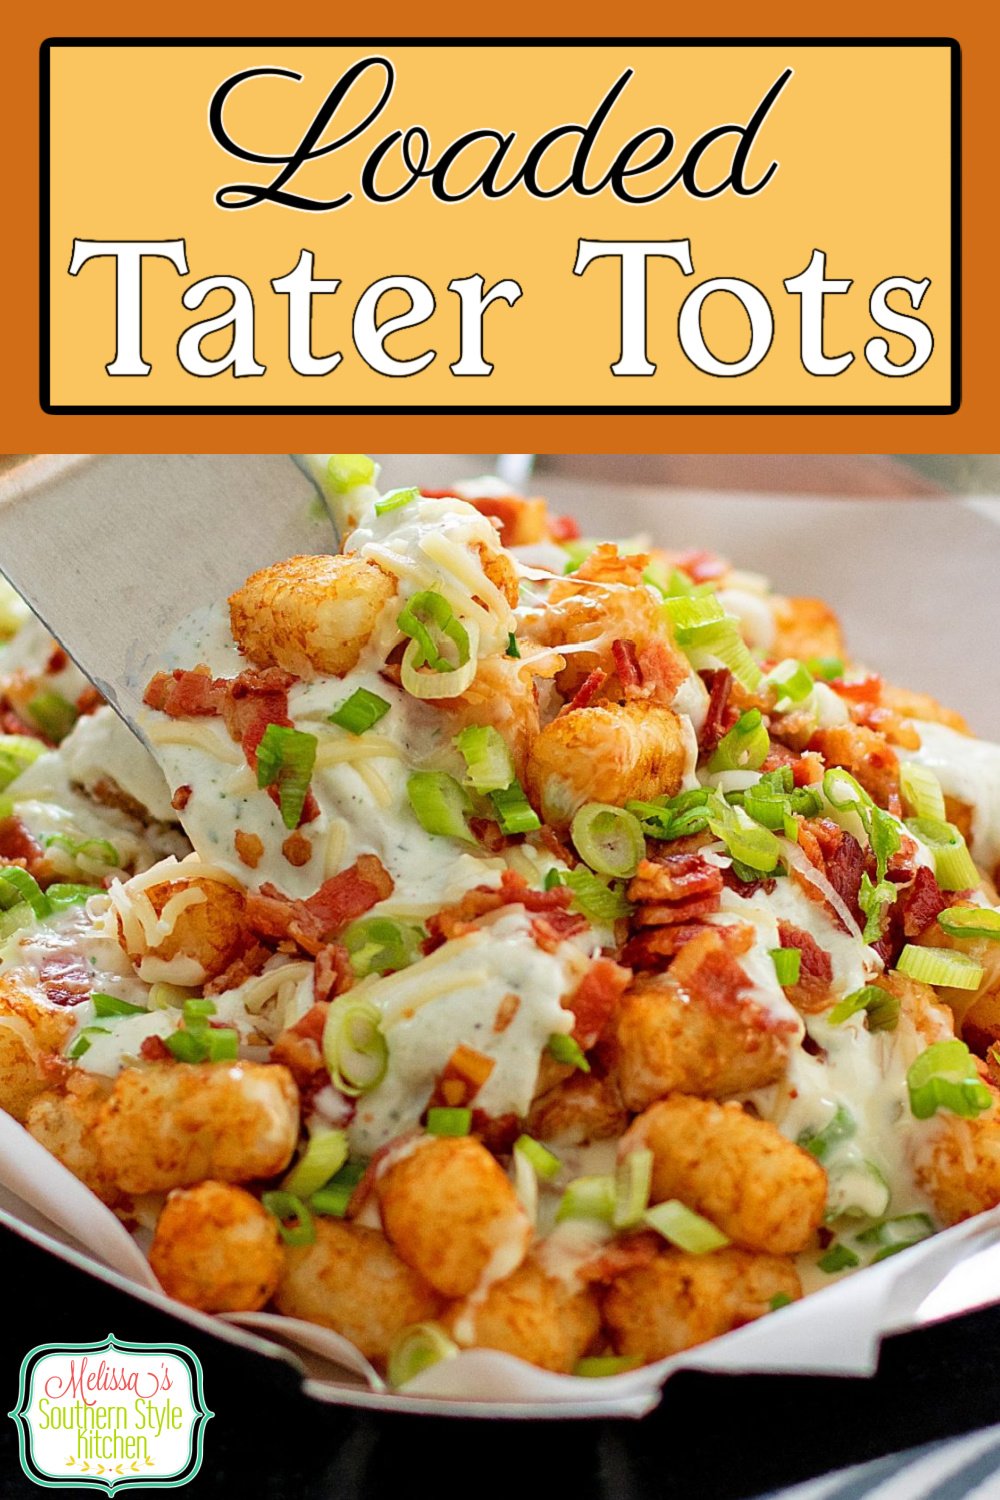 This fun to make Loaded Tater Tots Recipe can be served as an appetizer, side dish or for game day snacking #tatertots #loladedtatertots #queso #cheesytatertots #taterttotsrecipe #potatoes #potatorecipe #easyrecipes #sidedishrecipes #appetizers #southernrecipes via @melissasssk